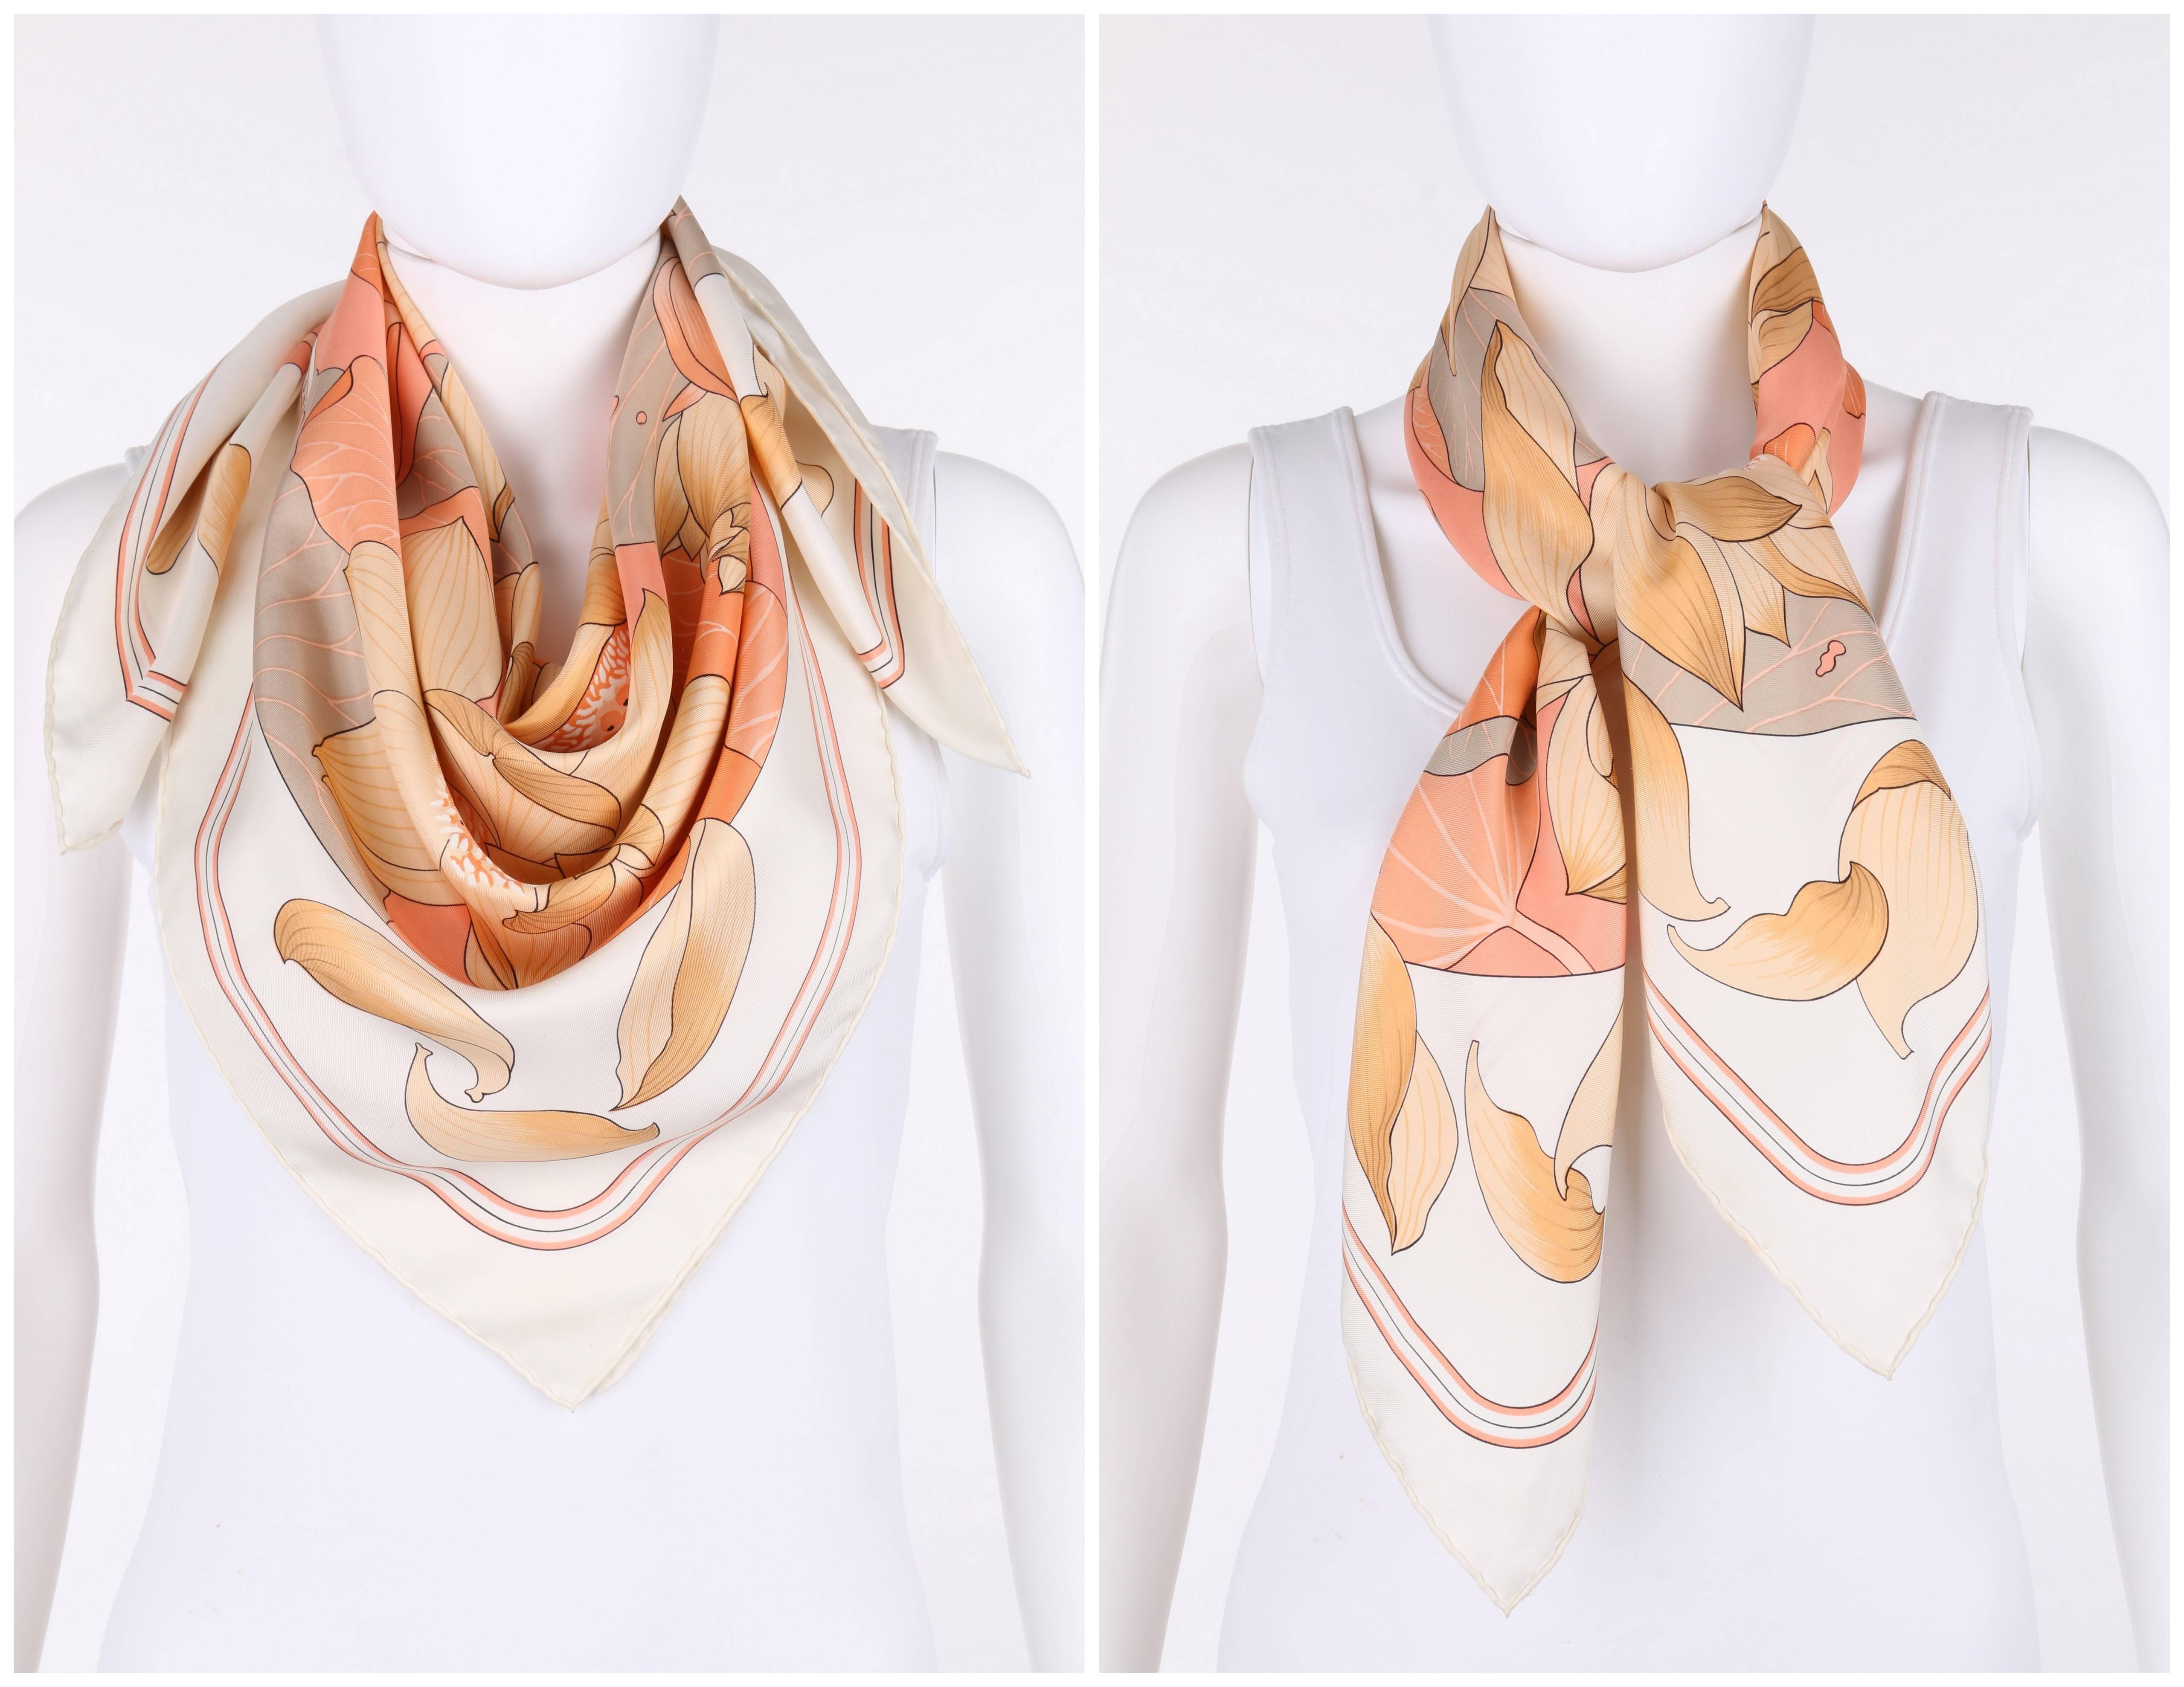 Vintage Hermes c.1976 "Fleurs De Lotus" silk scarf designed by Christiane Vauzelles. Winter white background with thin peach and black rounded line boarder print. Centered gray circular background with tan, beige, and peach lotus flower